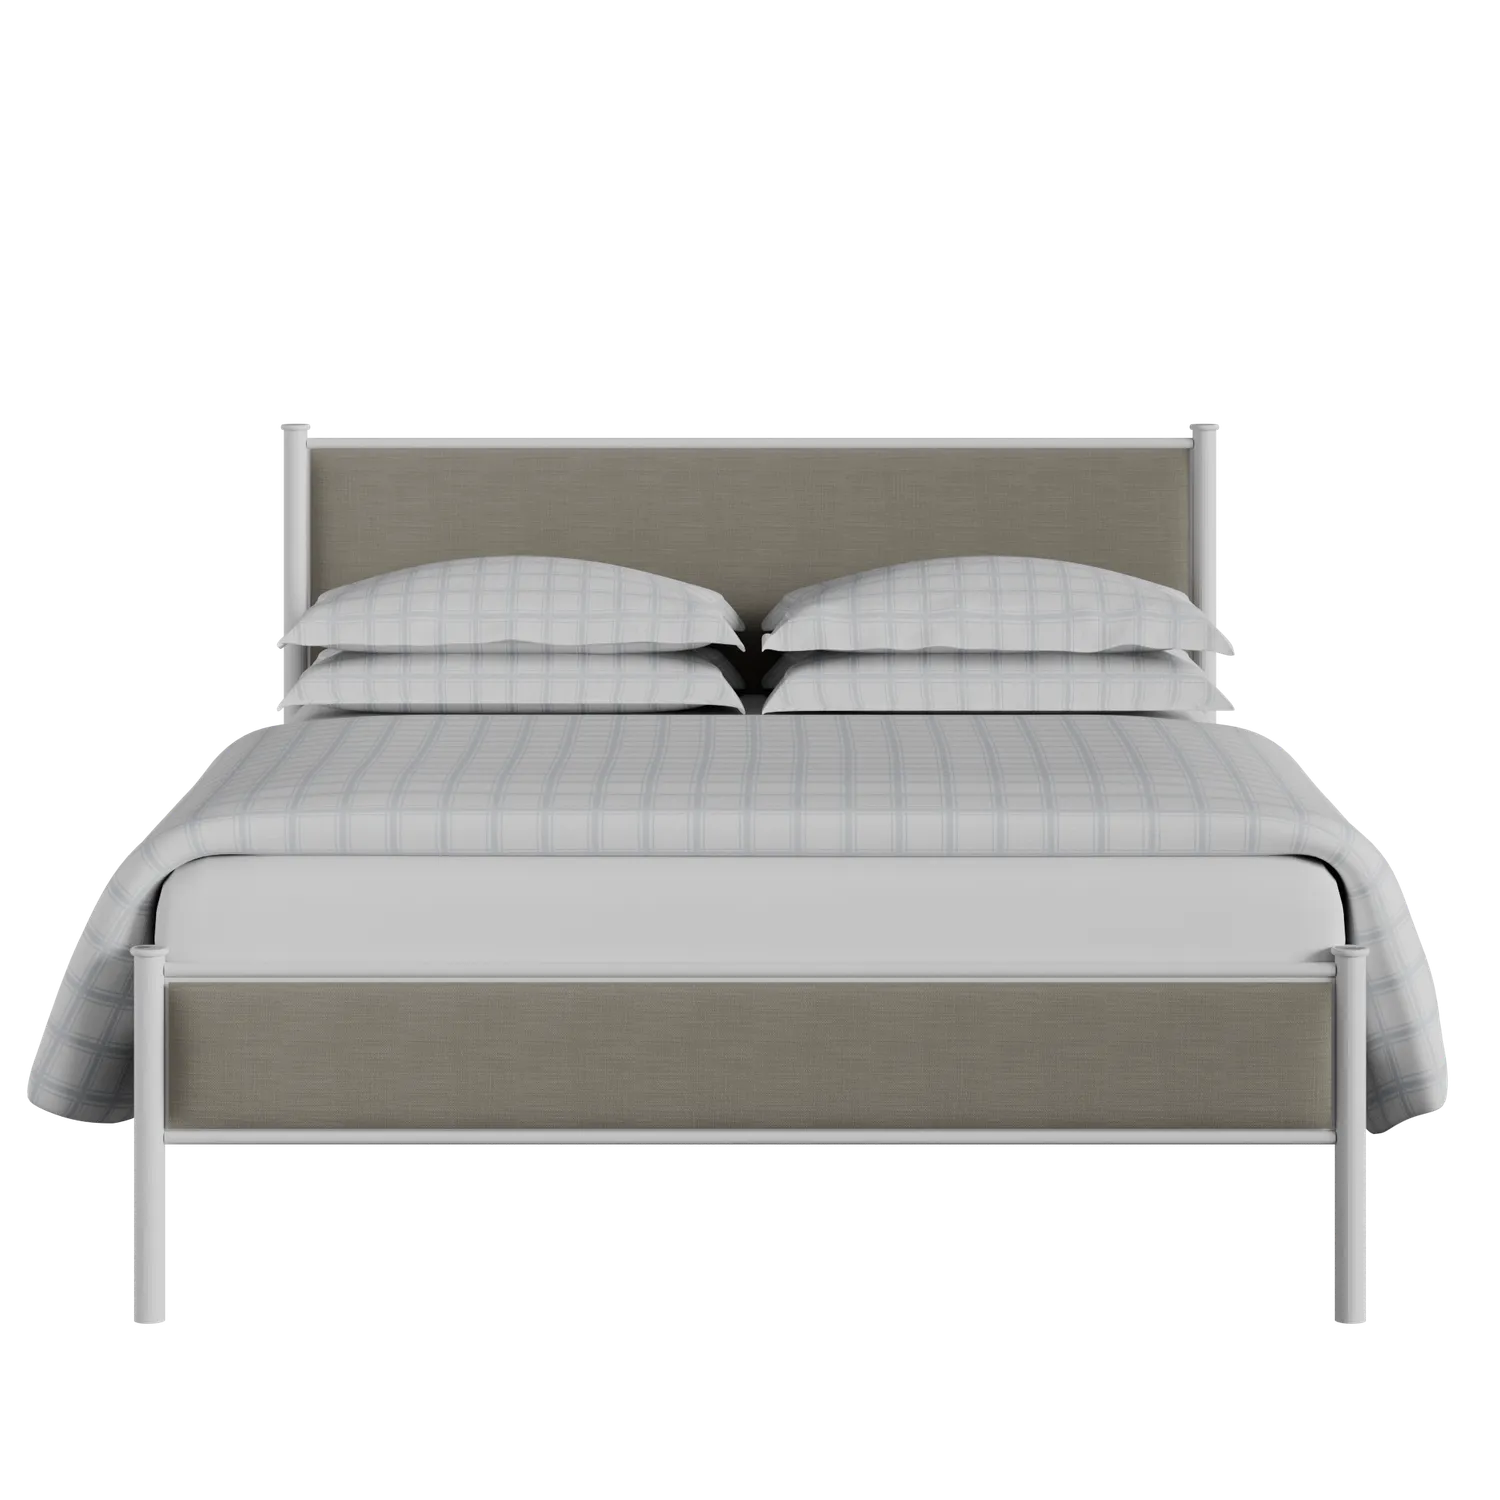 Brest iron/metal upholstered bed in white with grey fabric